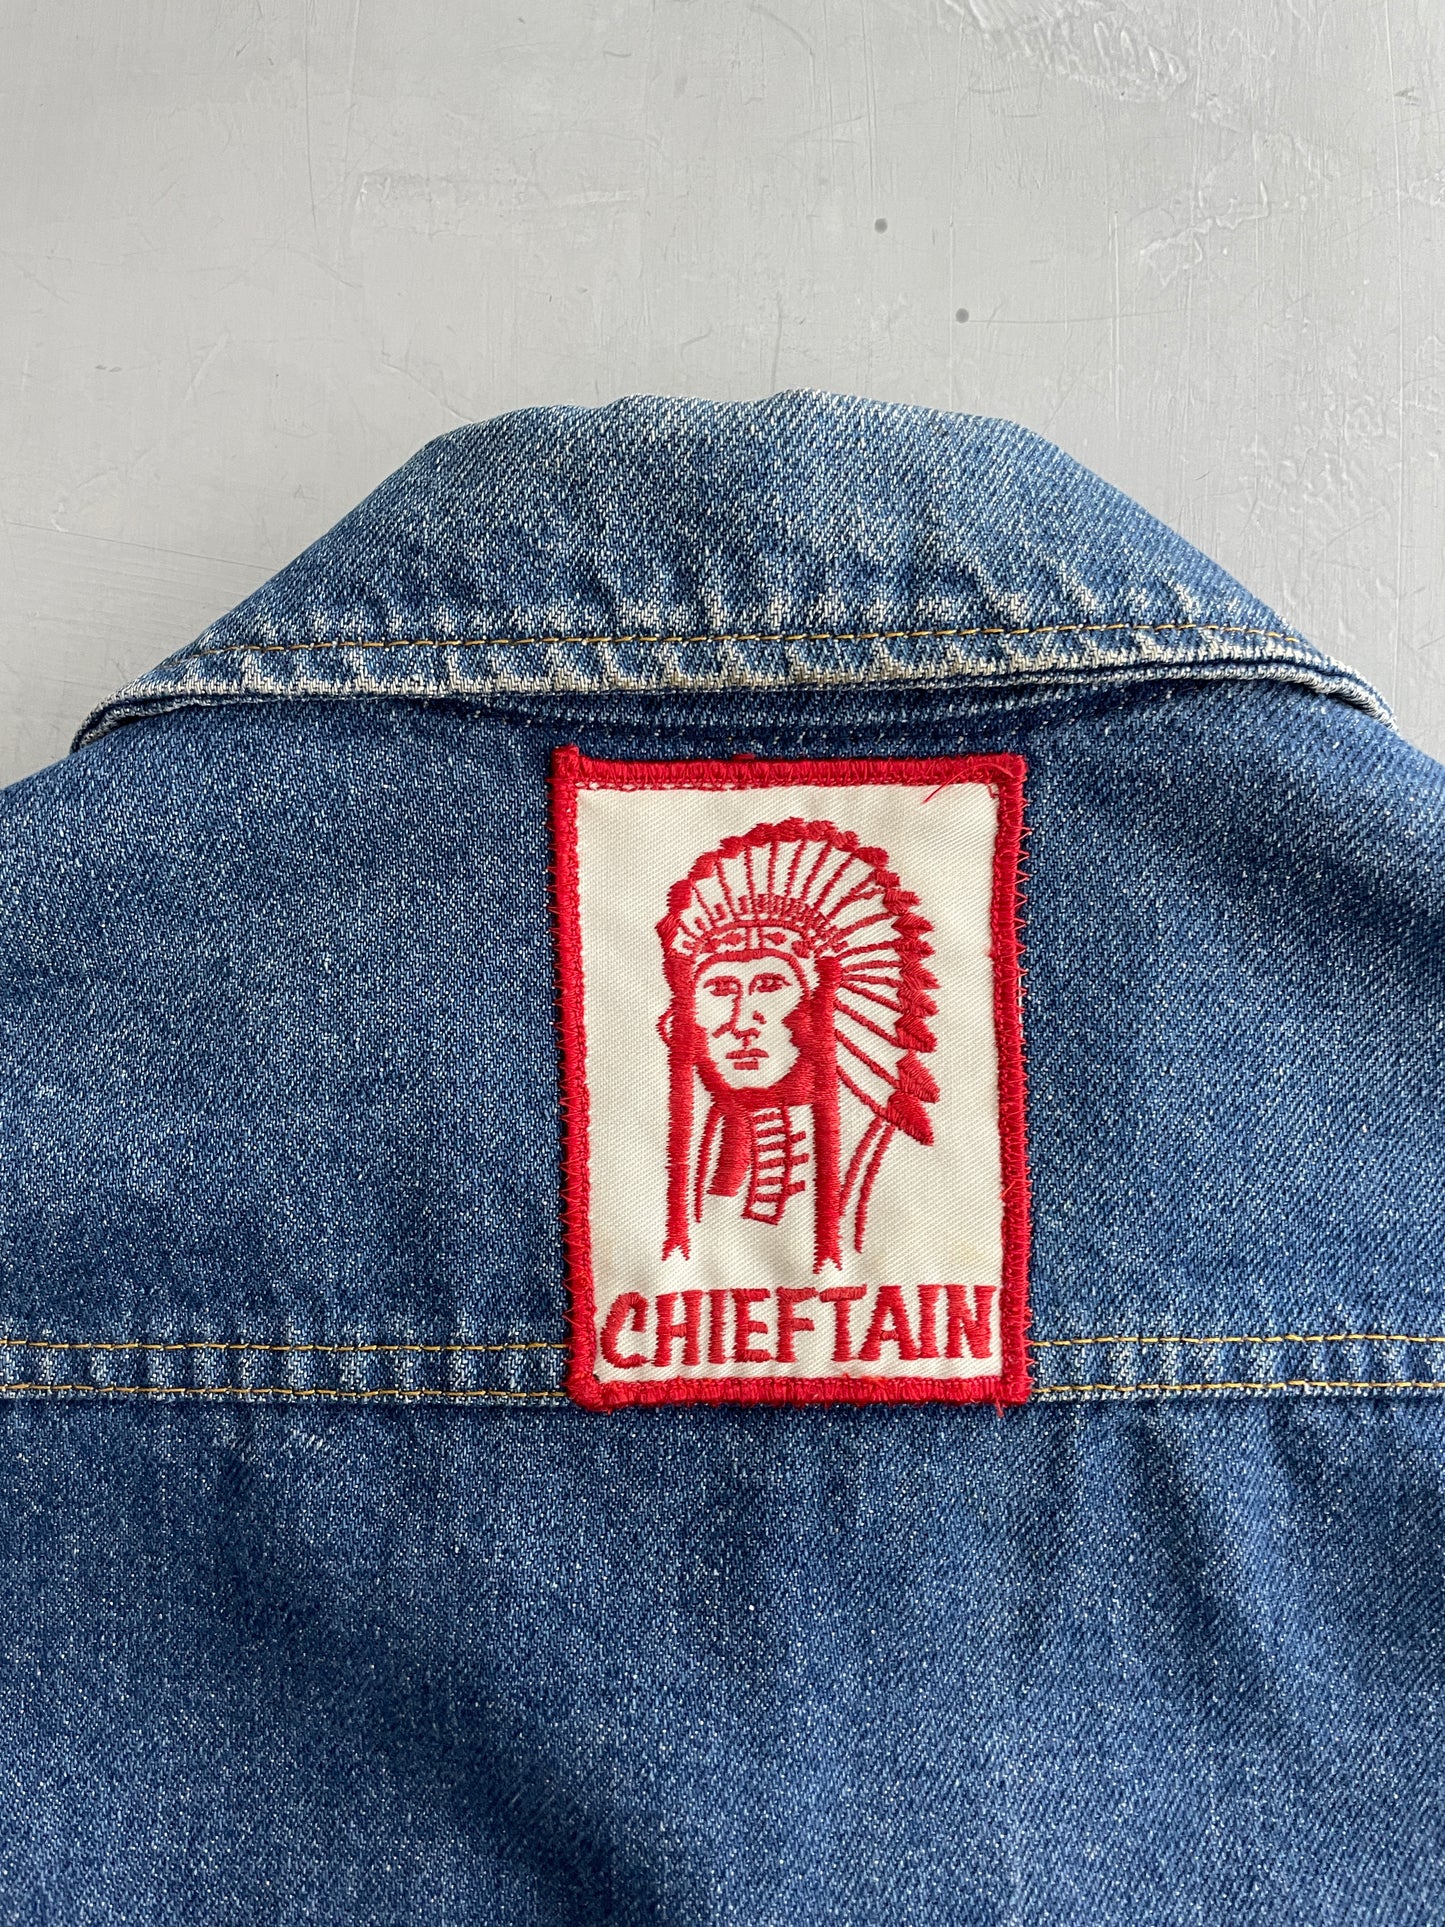 70's Patched Sears Westernwear Jacket [L]